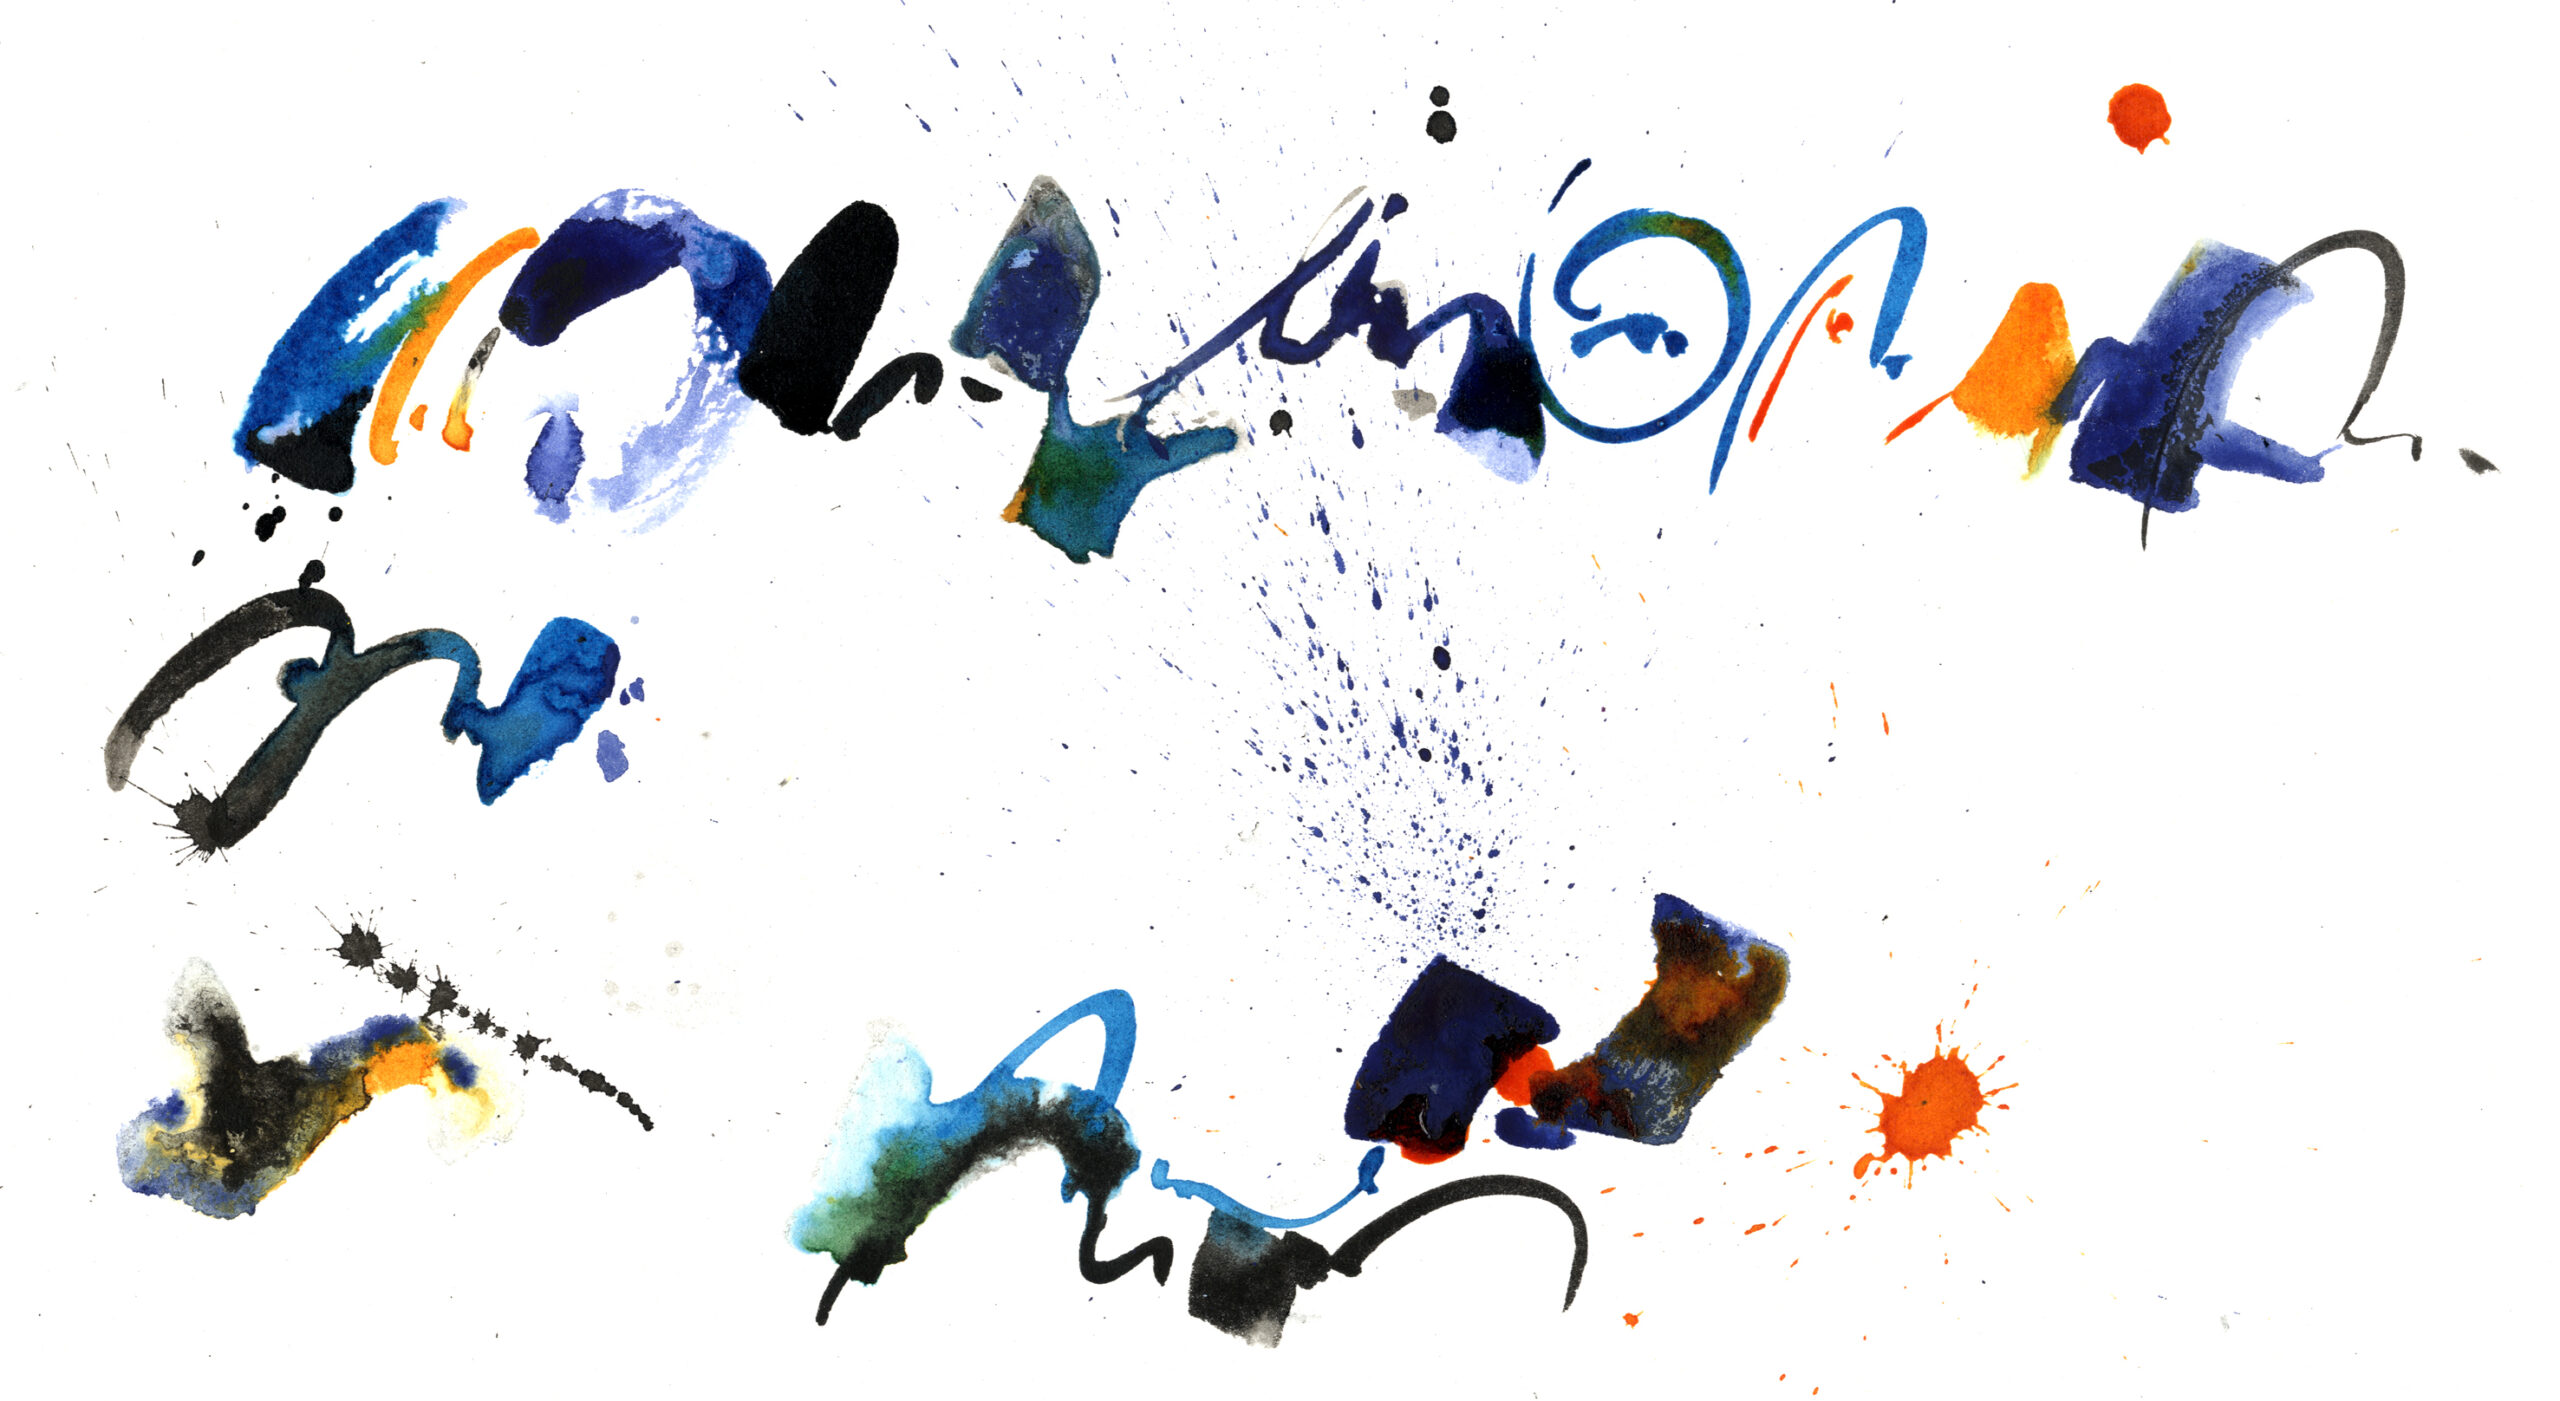 „A Whole Universe from a Pointed Brush“, Session II, Festival of Calligraphy, England<br /> August 16th - 18th, 2022